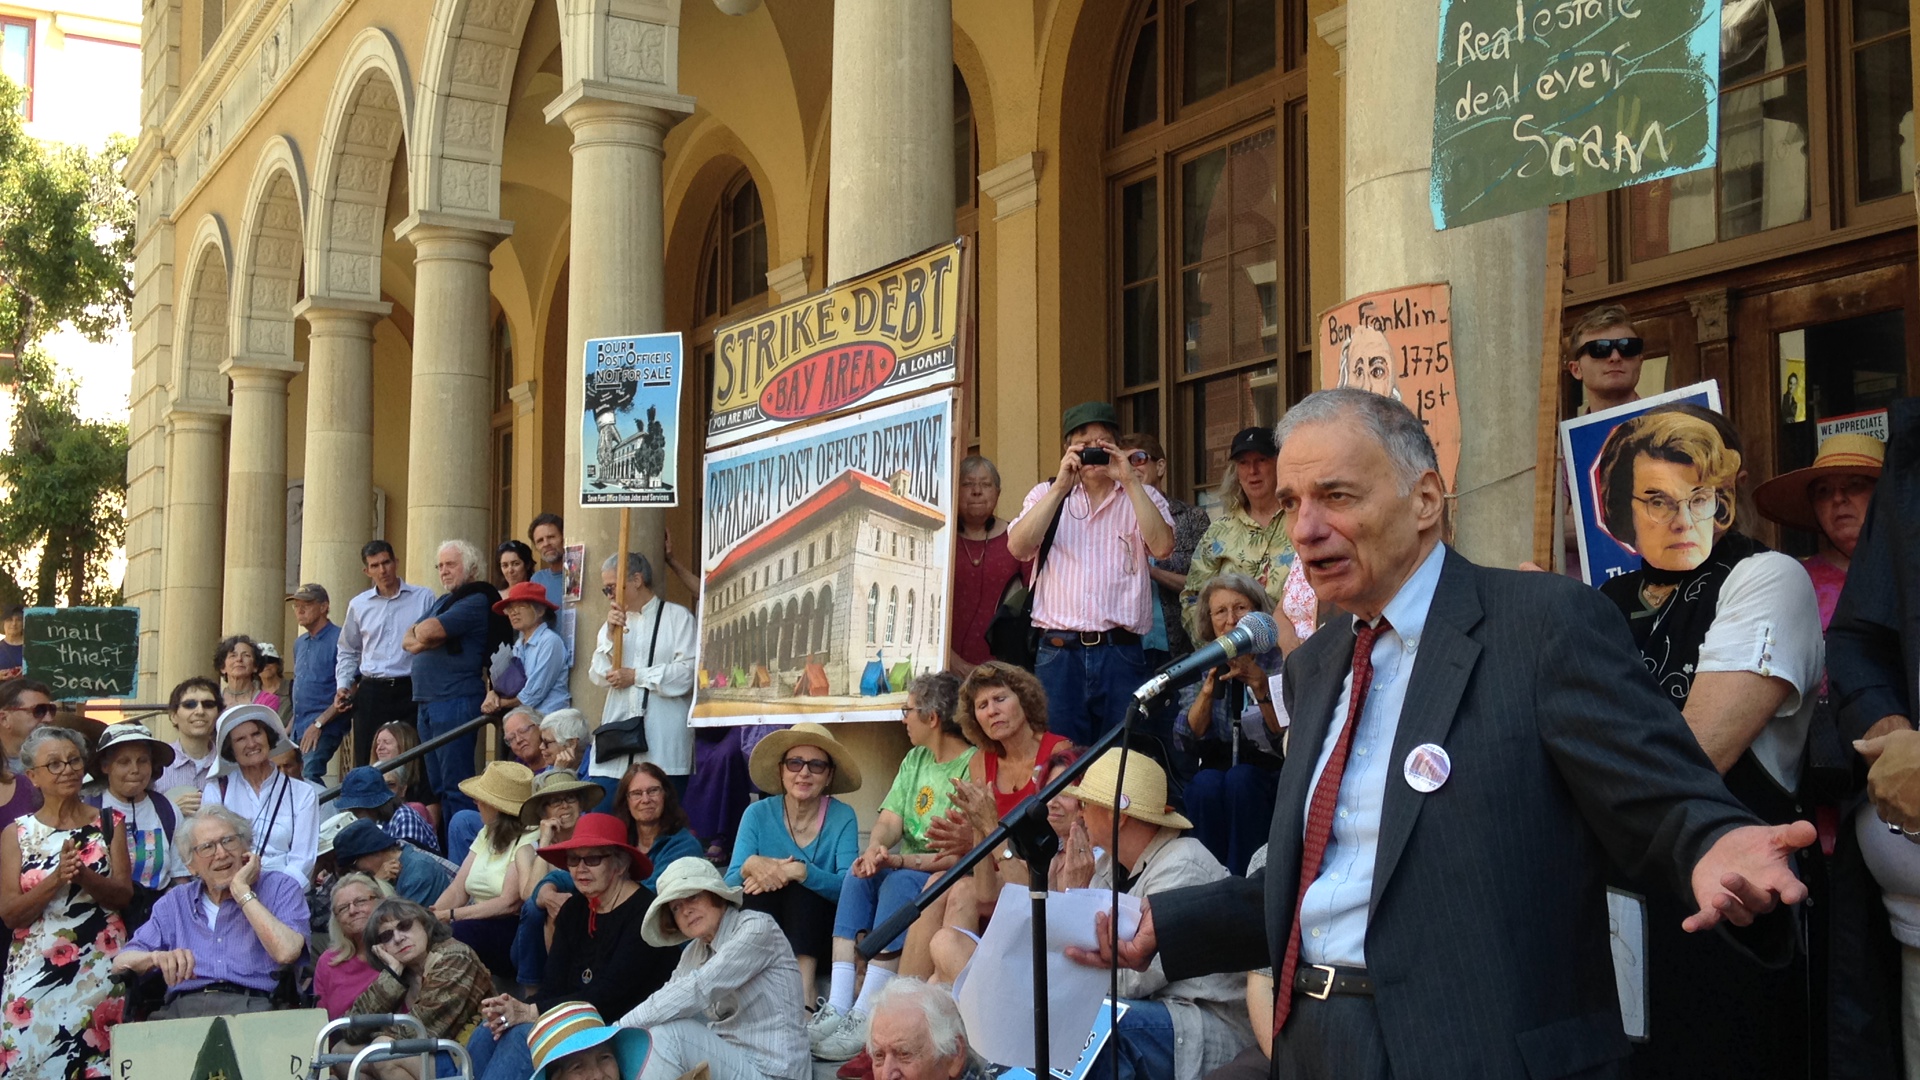 The Life and Legacy of Ralph Nader